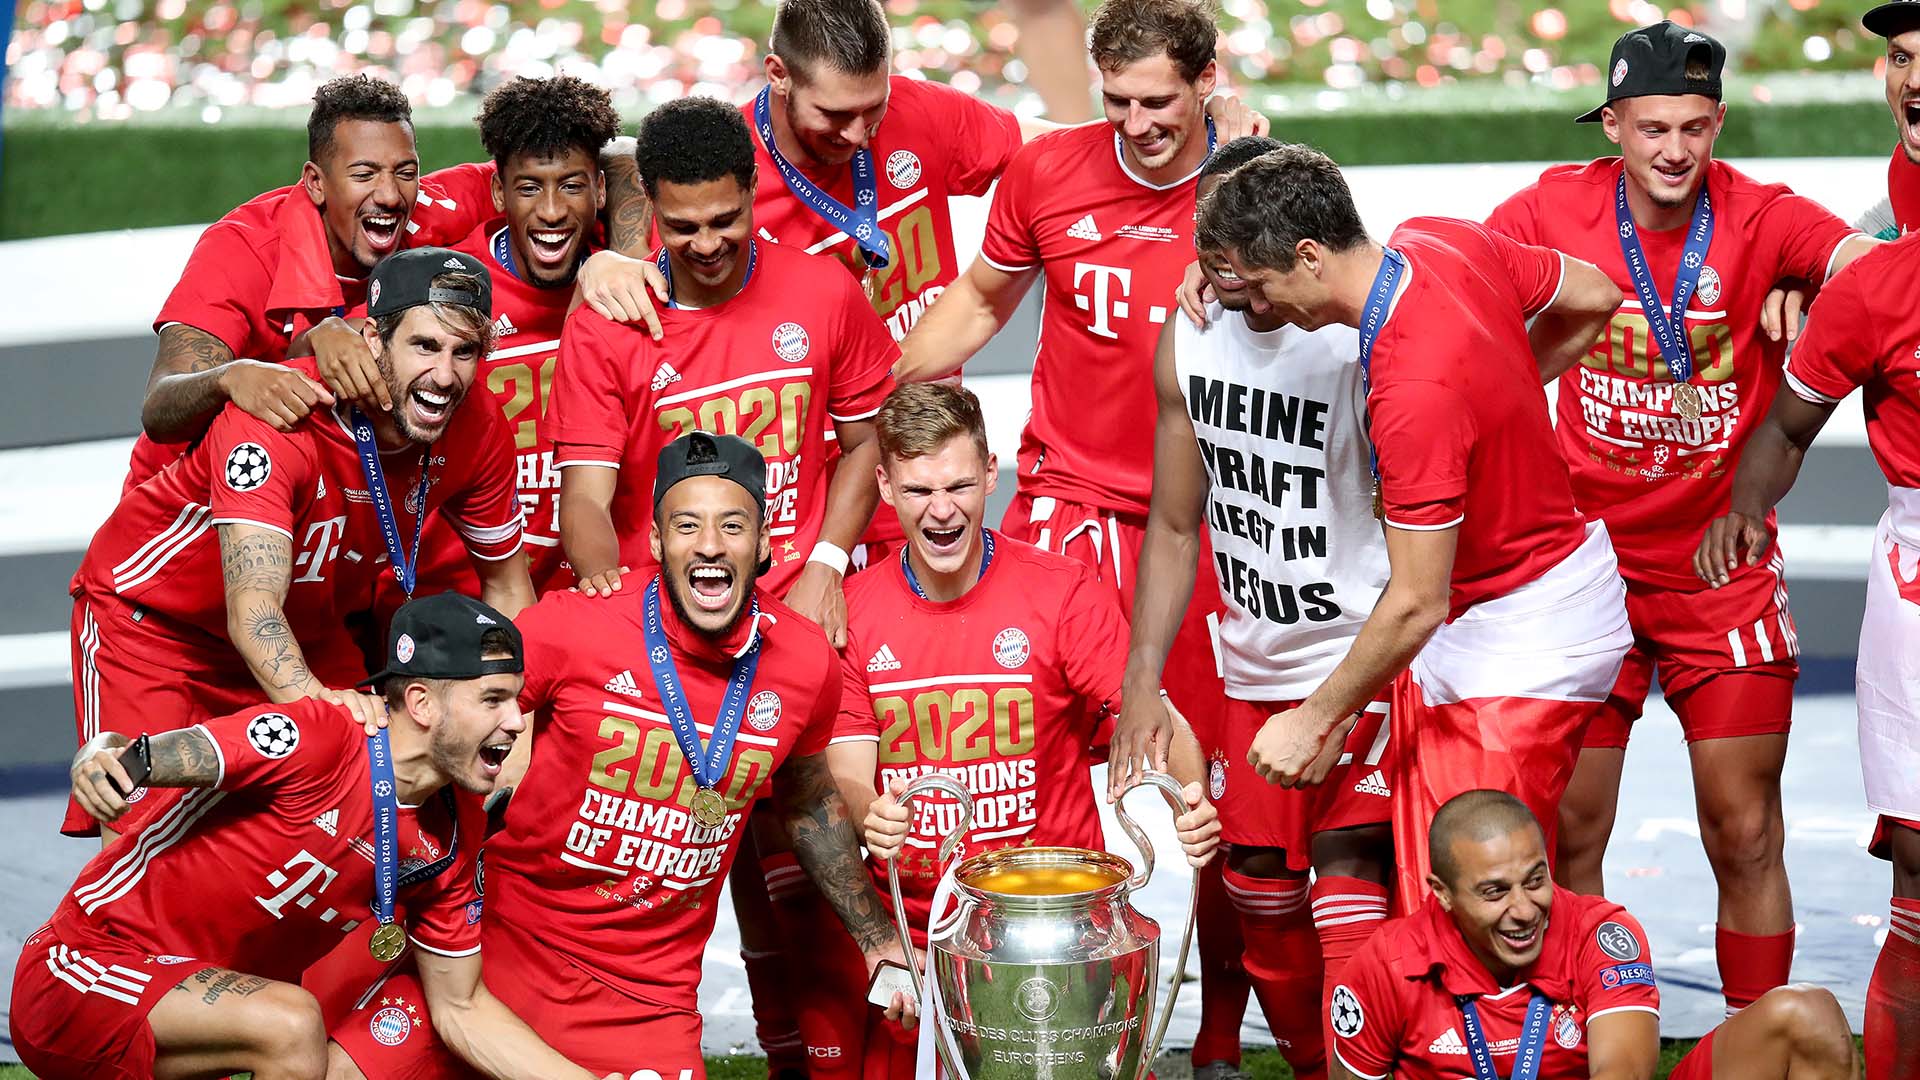 LISBON, PORTUGAL - AUGUST 23: Players of Bayern Muenchen celebrate the victory during the UEFA Champions League Final match between Paris Saint-Germain and Bayern Munich at Estadio do Sport Lisboa e Benfica on August 23, 2020 in Lisbon, Portugal. (Photo by M. Donato/Getty Images for FC Bayern)